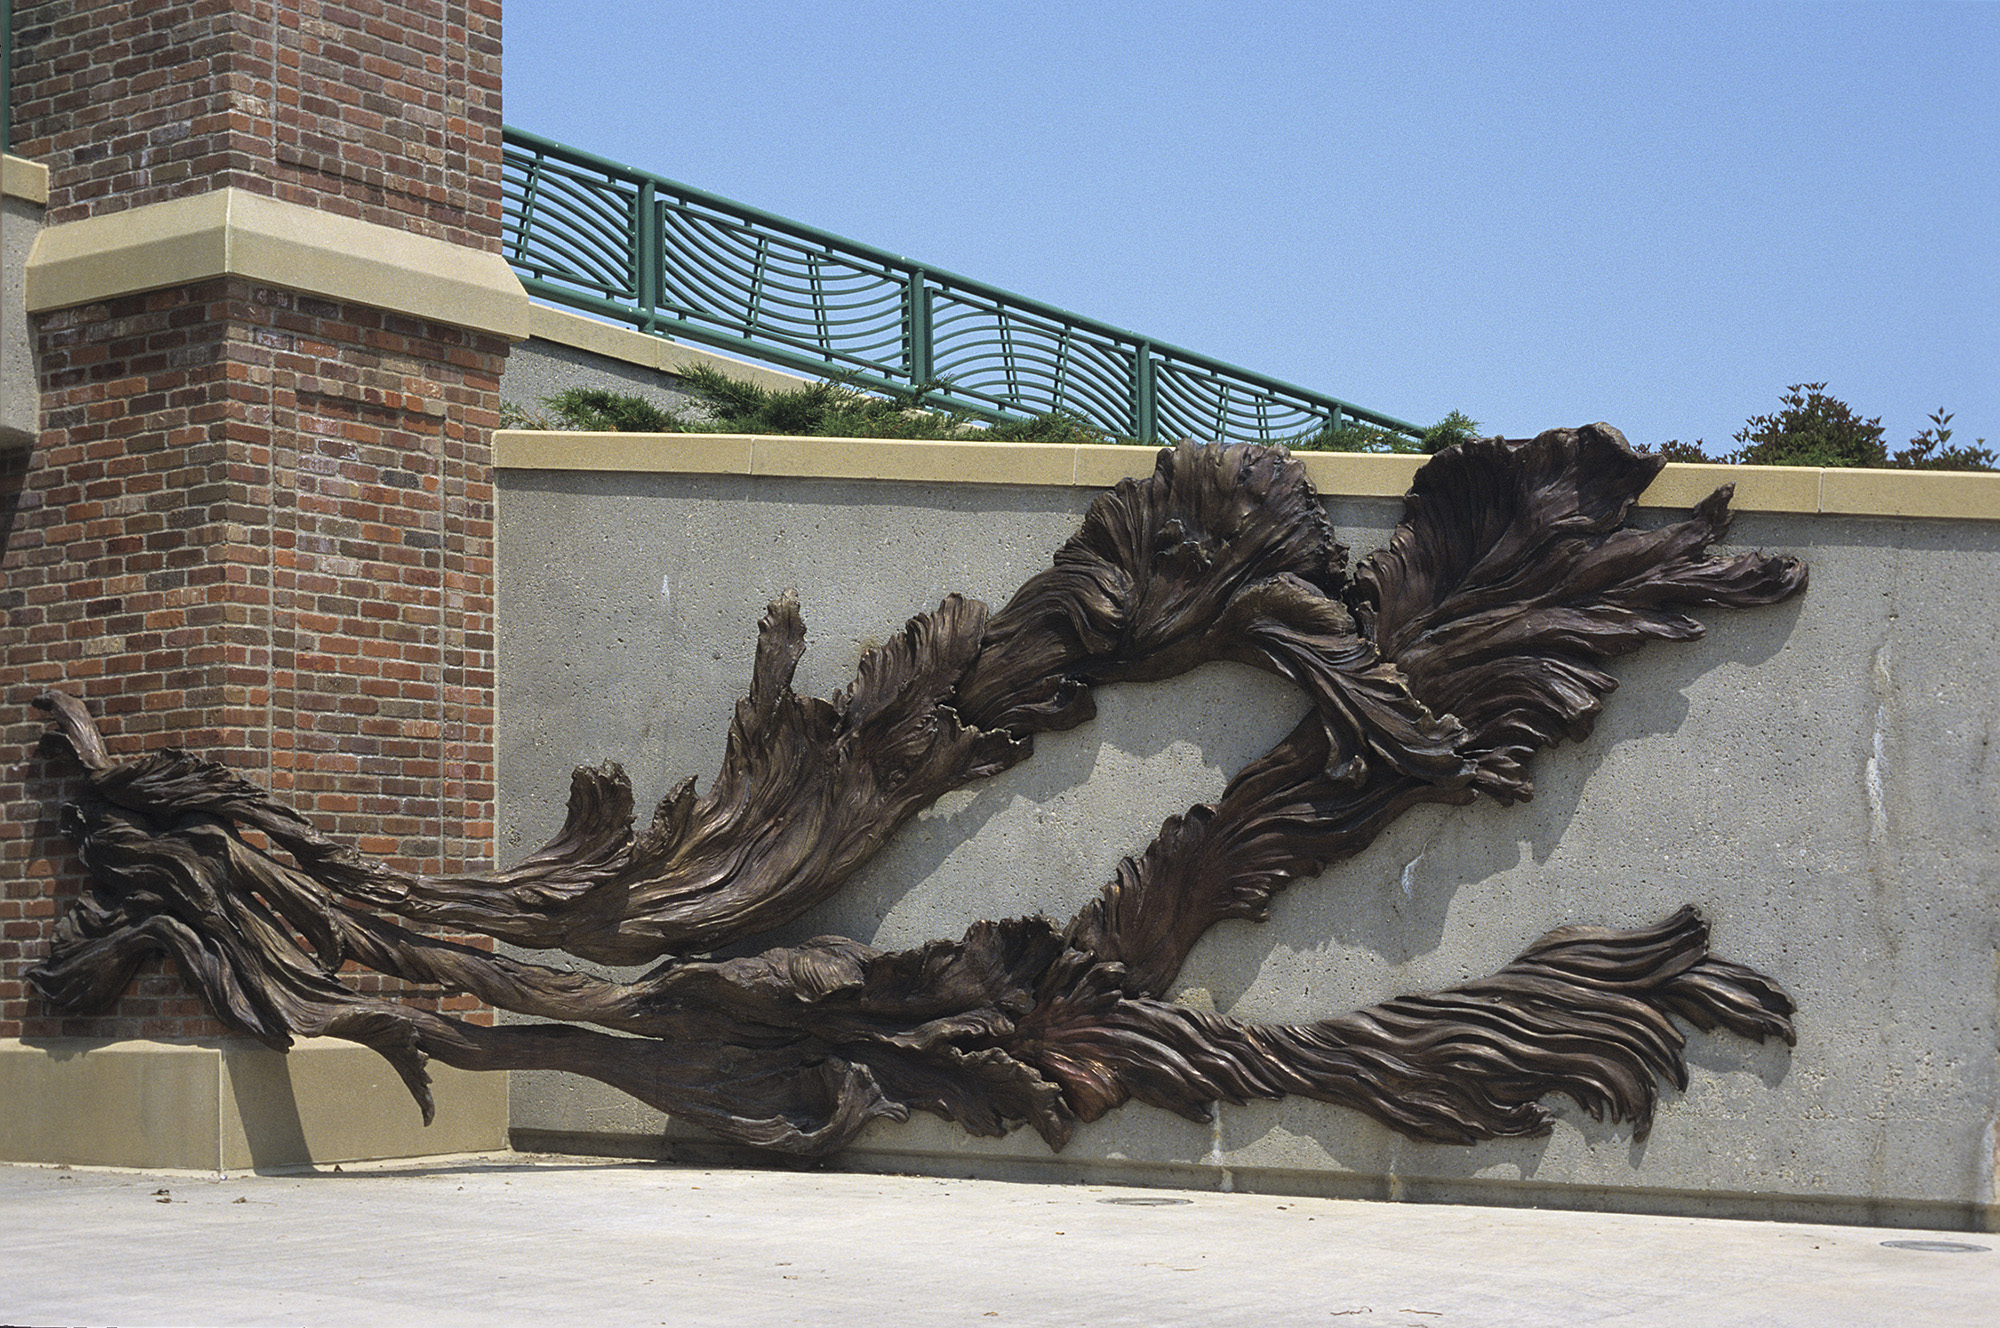   Floodwaters , bronze section, south wall, 26' x 12' x 3'&nbsp; 